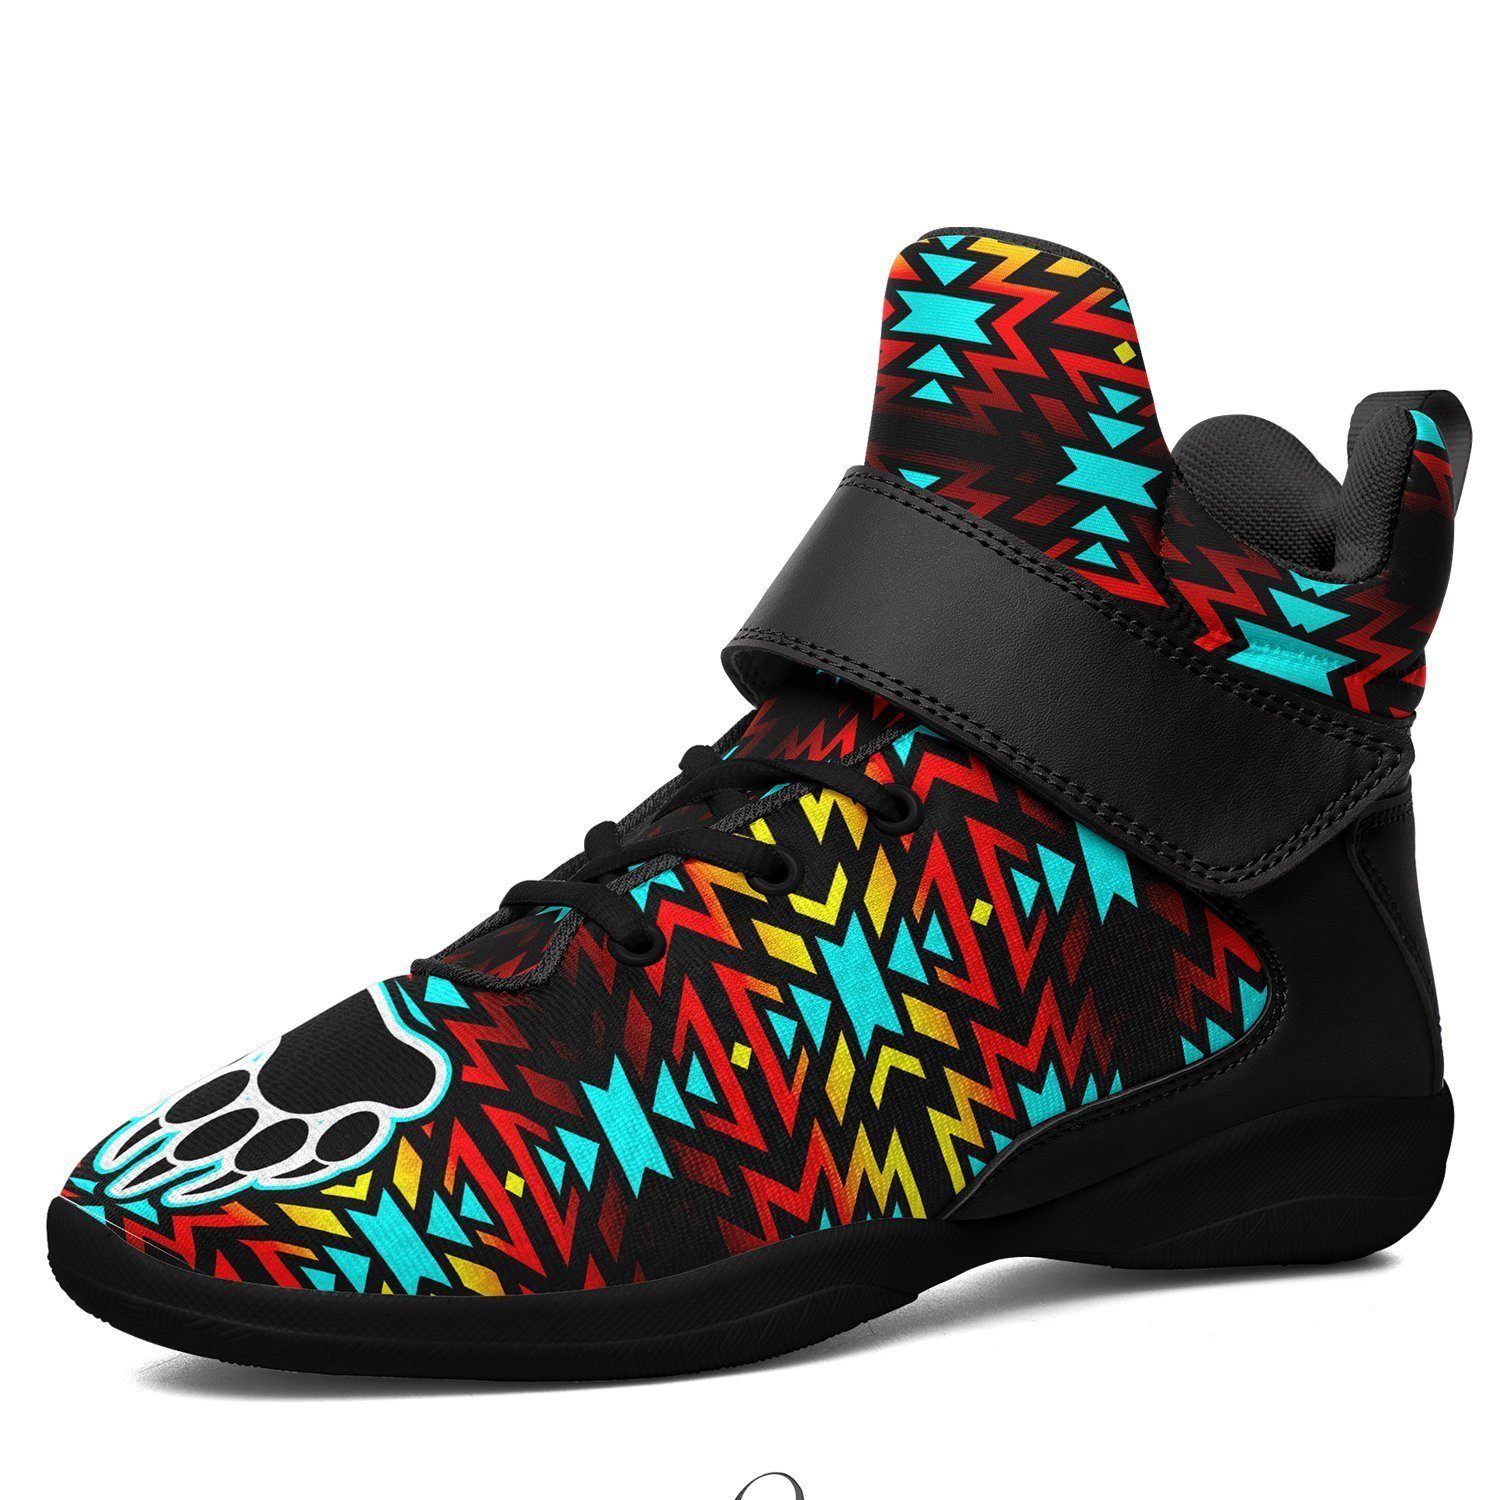 Fire Colors and Turquoise Bearpaw Kid's Ipottaa Basketball / Sport High Top Shoes 49 Dzine US Child 12.5 / EUR 30 Black Sole with Black Strap 